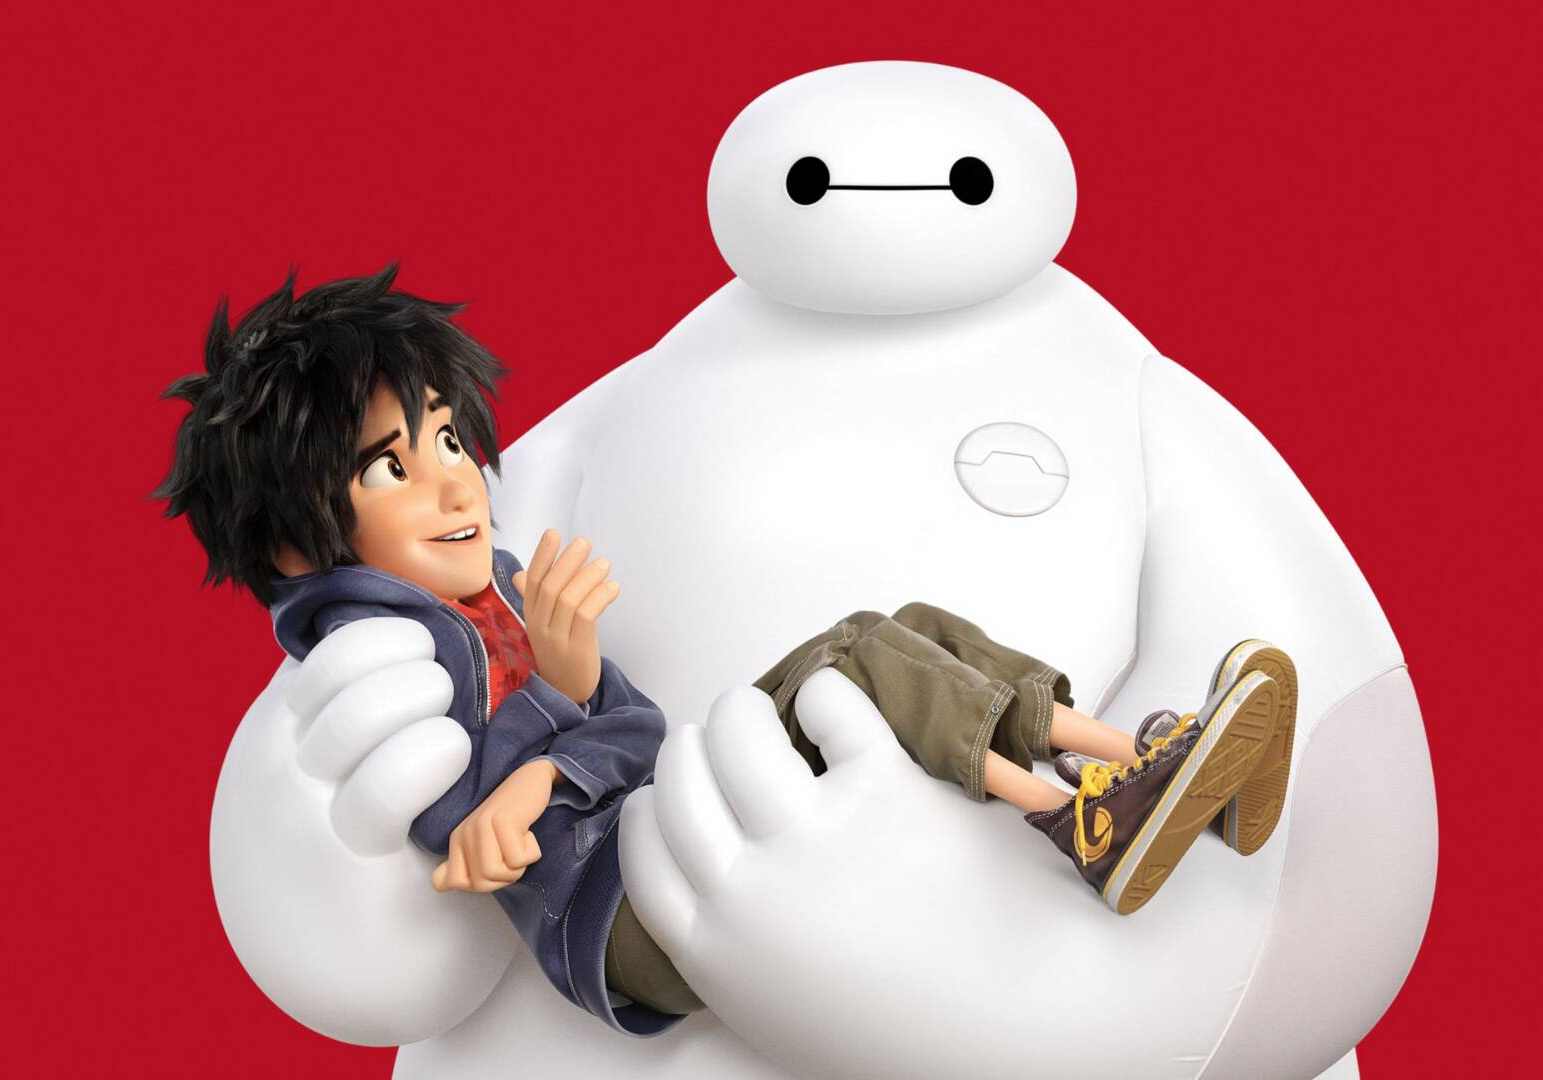 Paymax!  The new spin-off of Big Hero 6